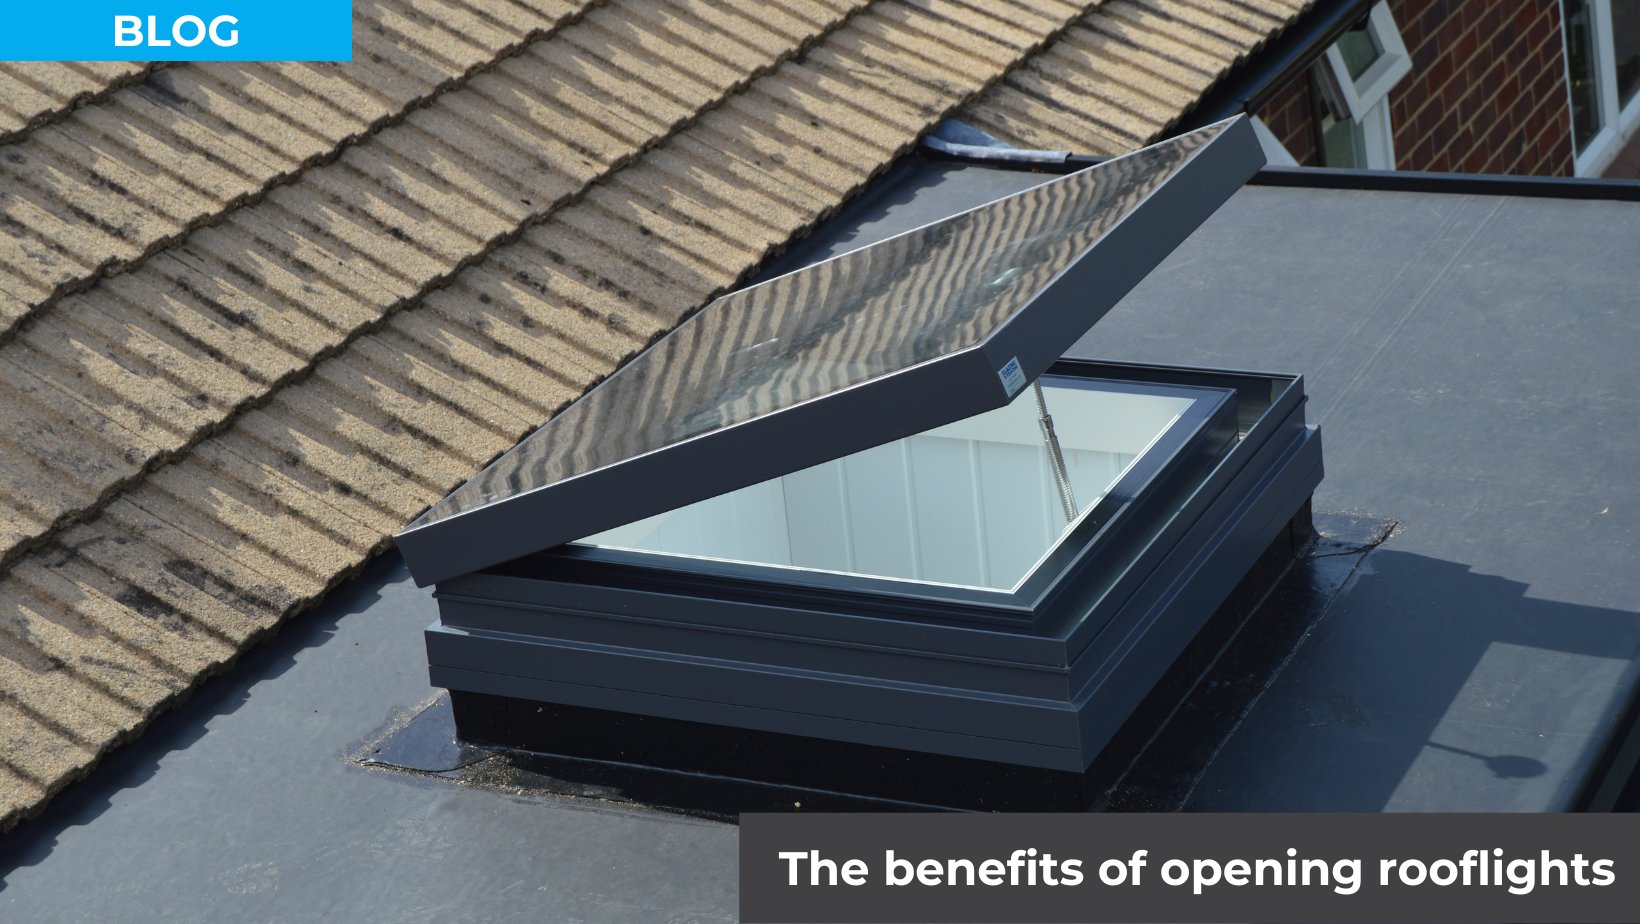 The benefits of opening rooflights